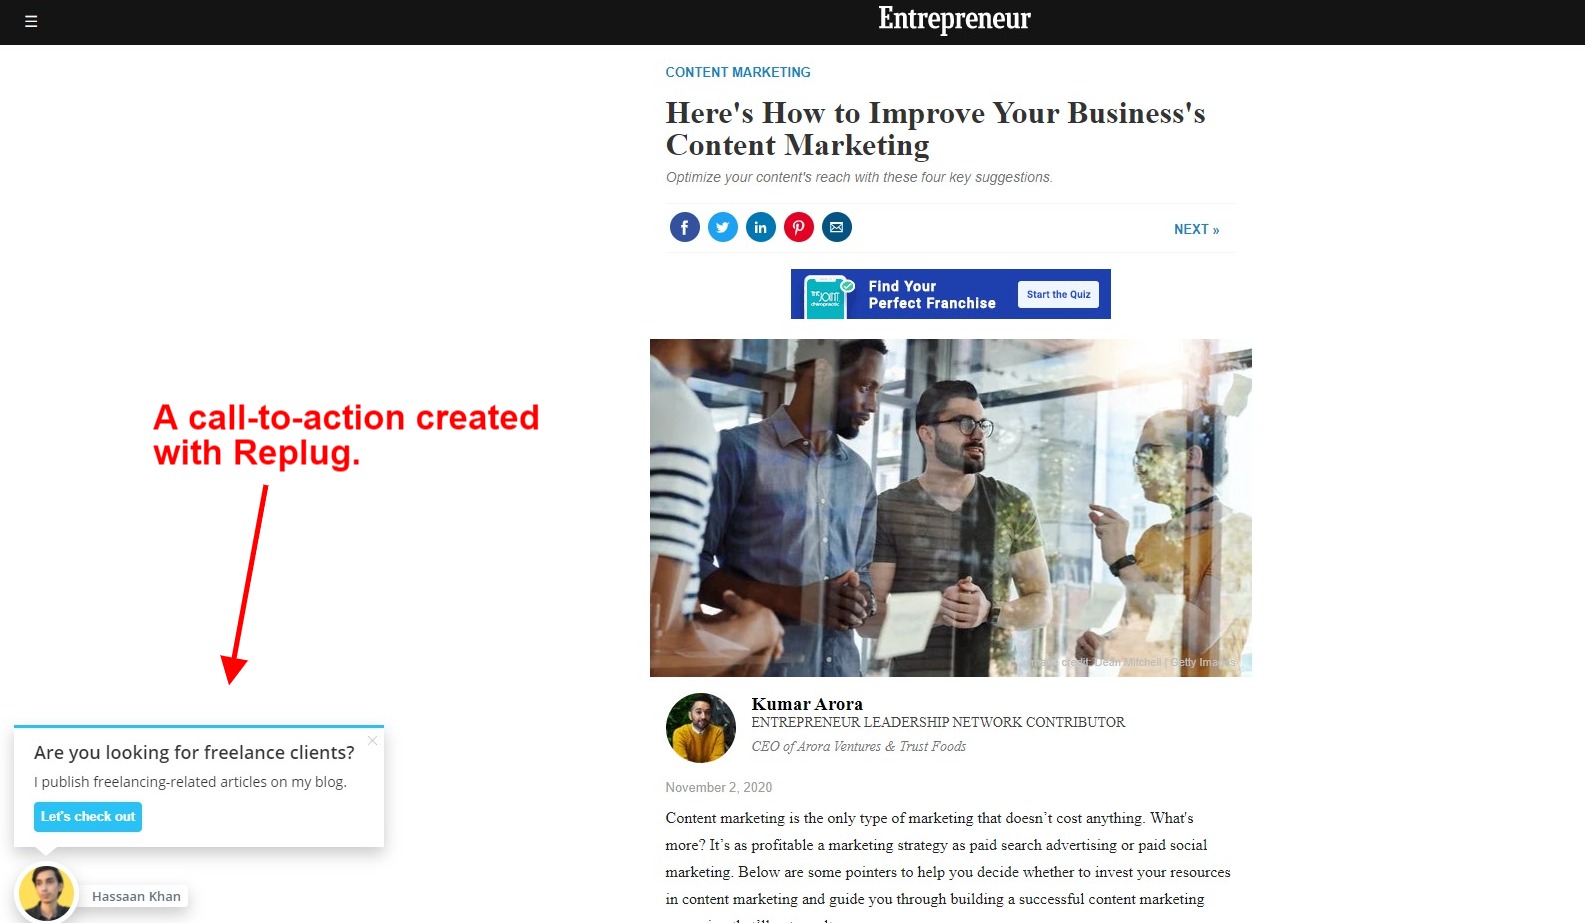 An example of call-to-action created via Replug on Entrepreneur